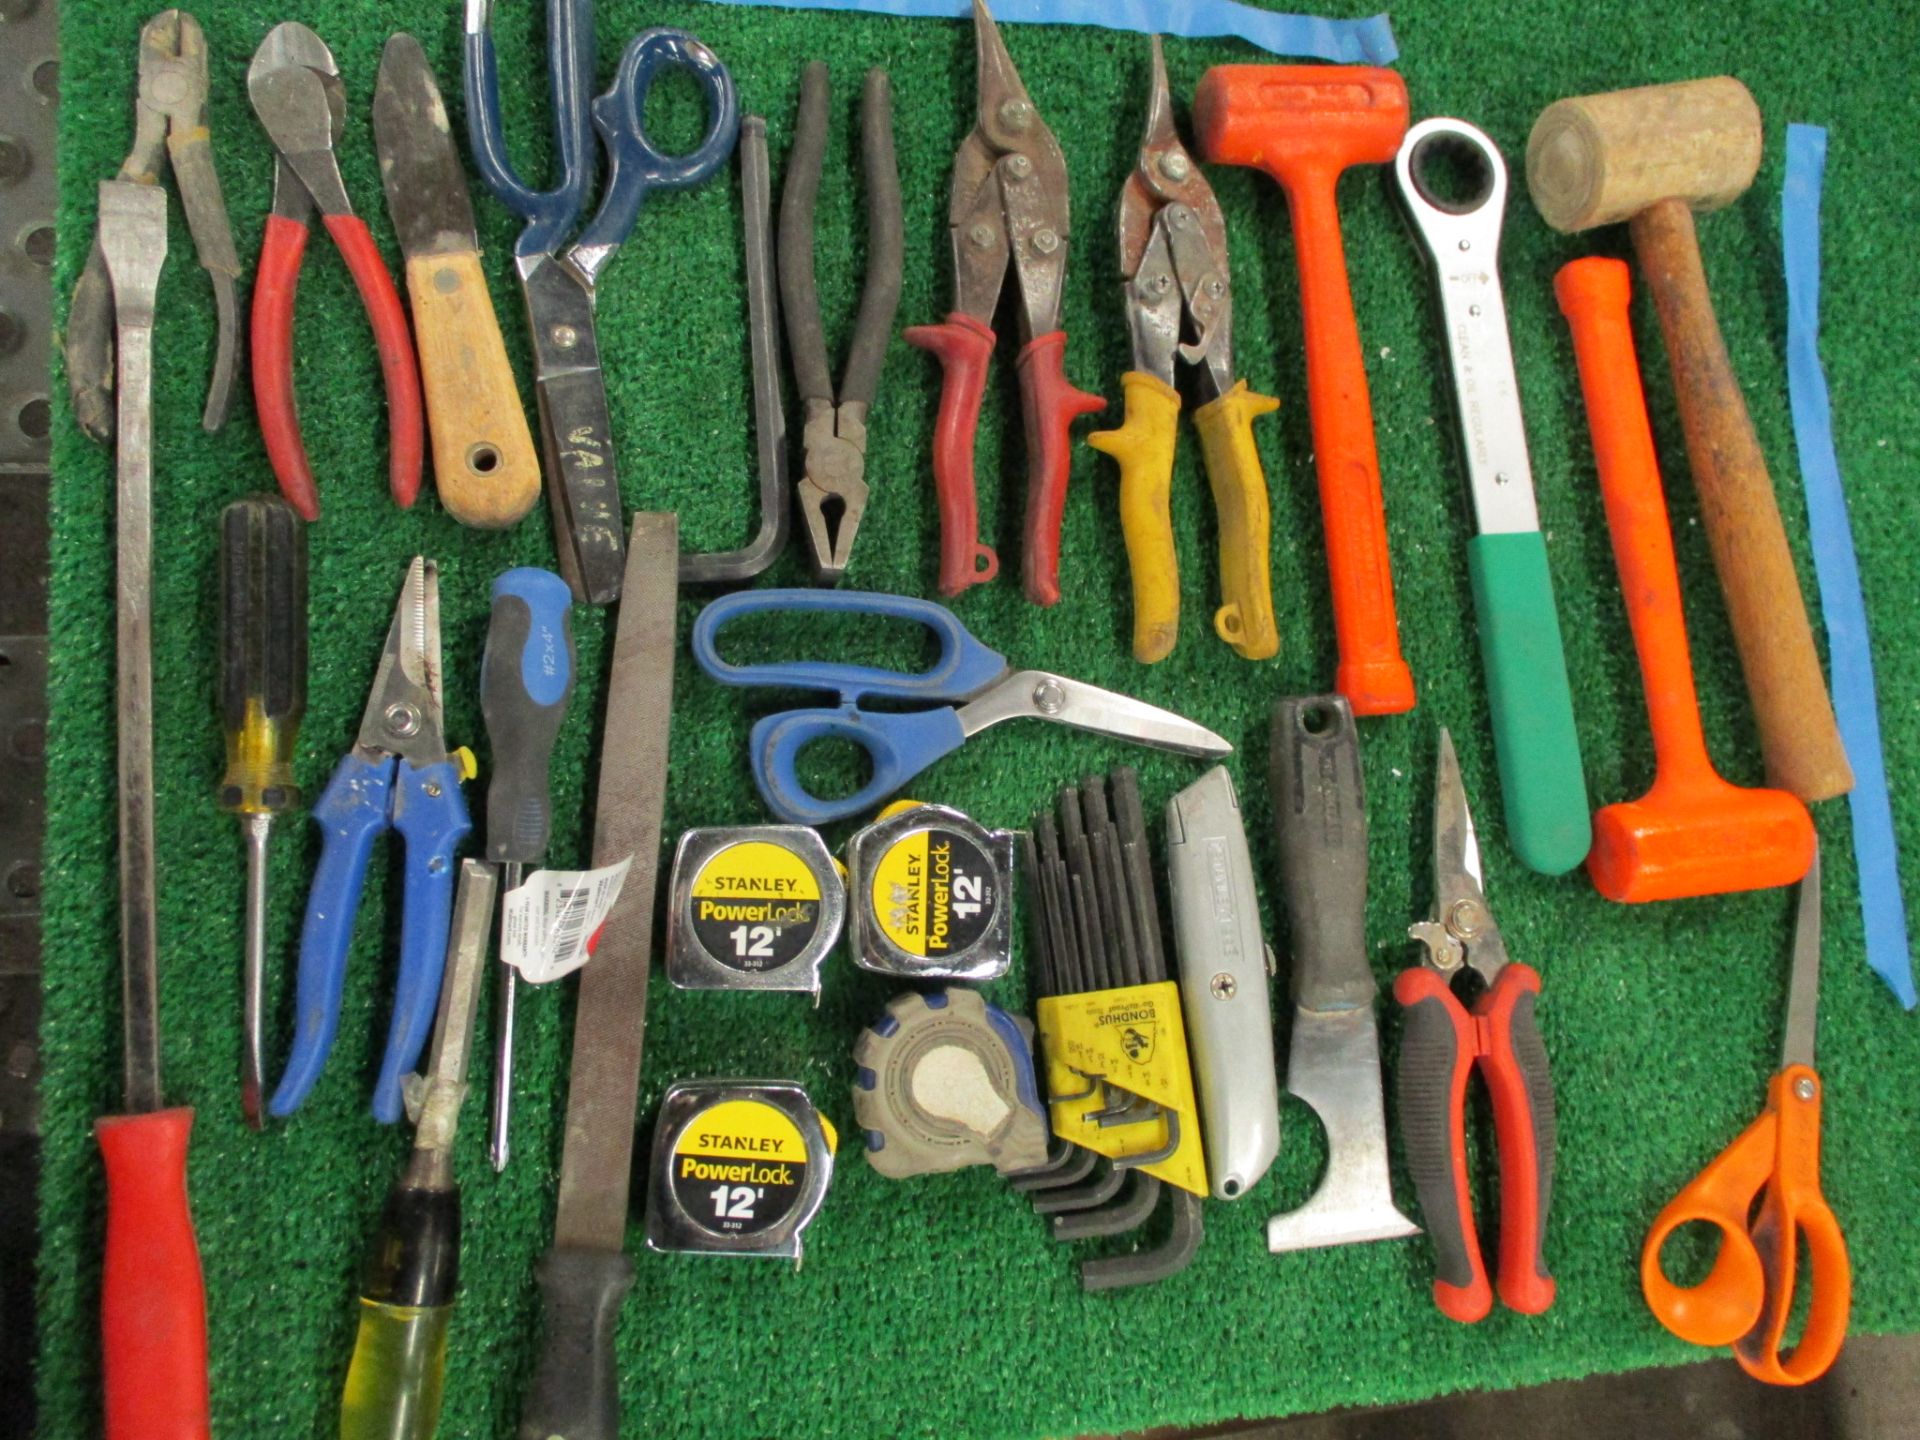 Assorted Hand Tools including Hammers, Screw Drivers, Putty Knives, Utility Knives, Pliers, Snips, T